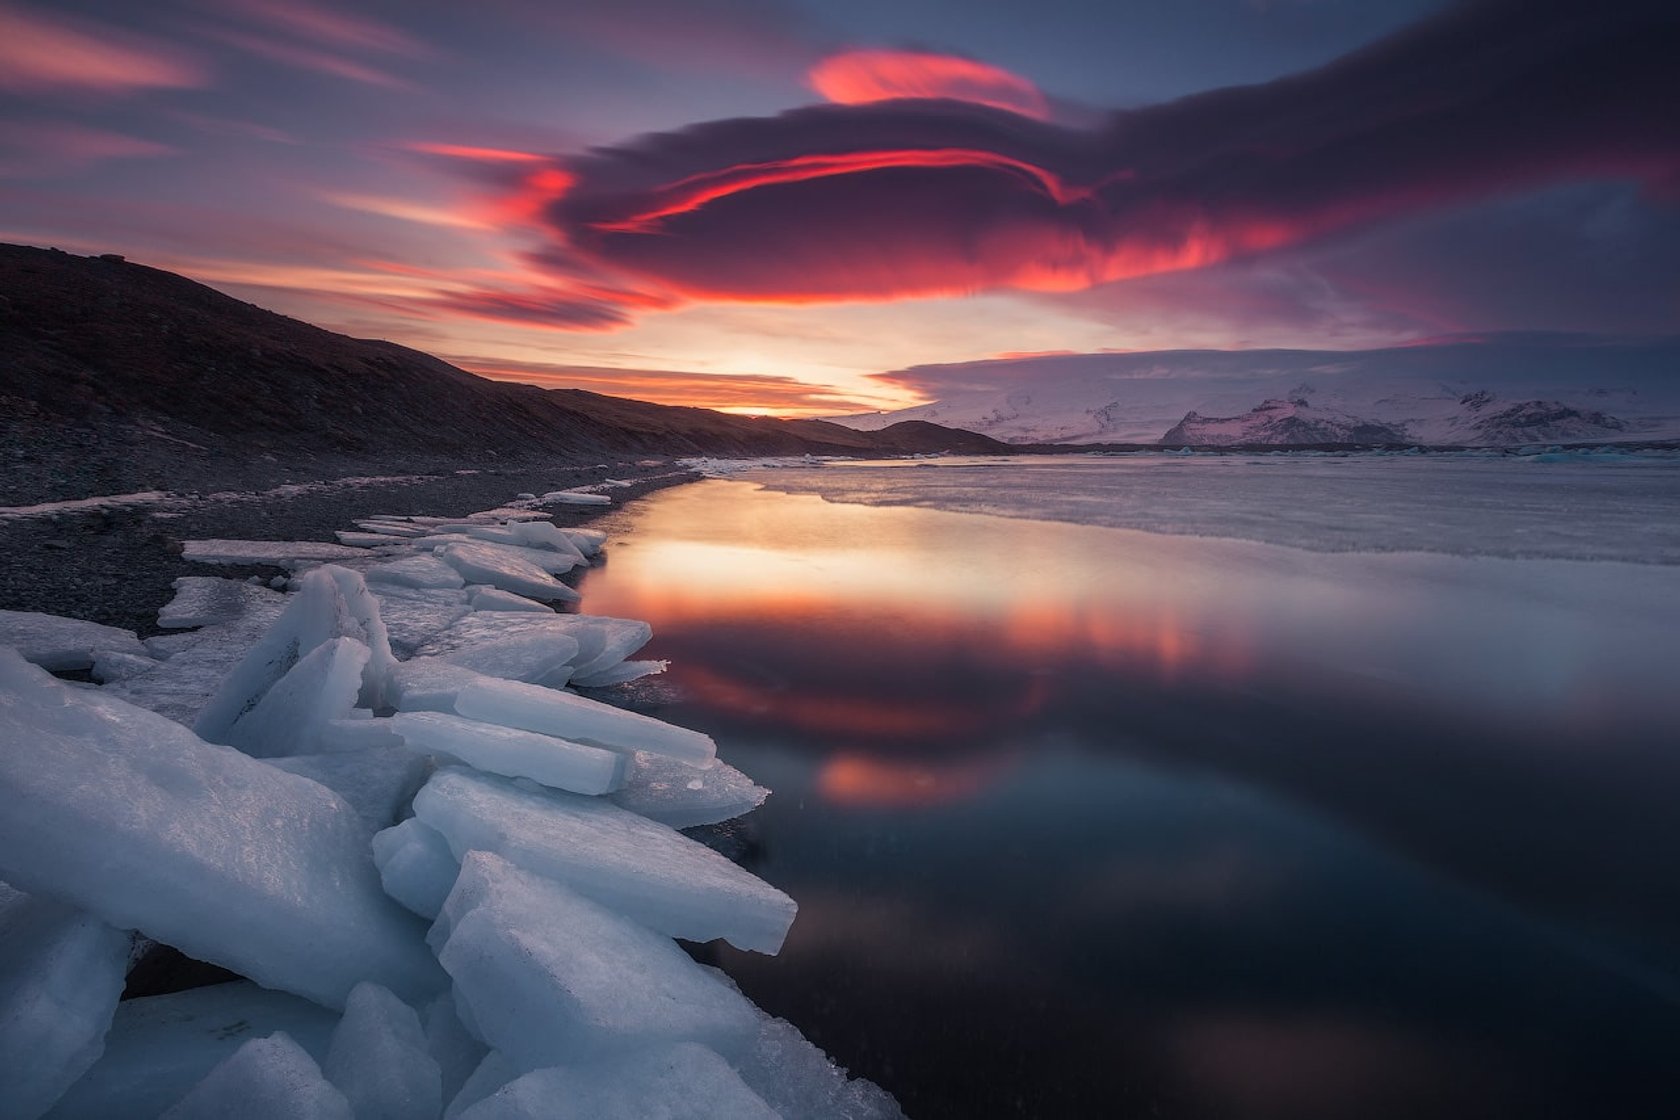 Traveling to Iceland can dramatically improve your photography skills and even unlock new life opportunities.(5)